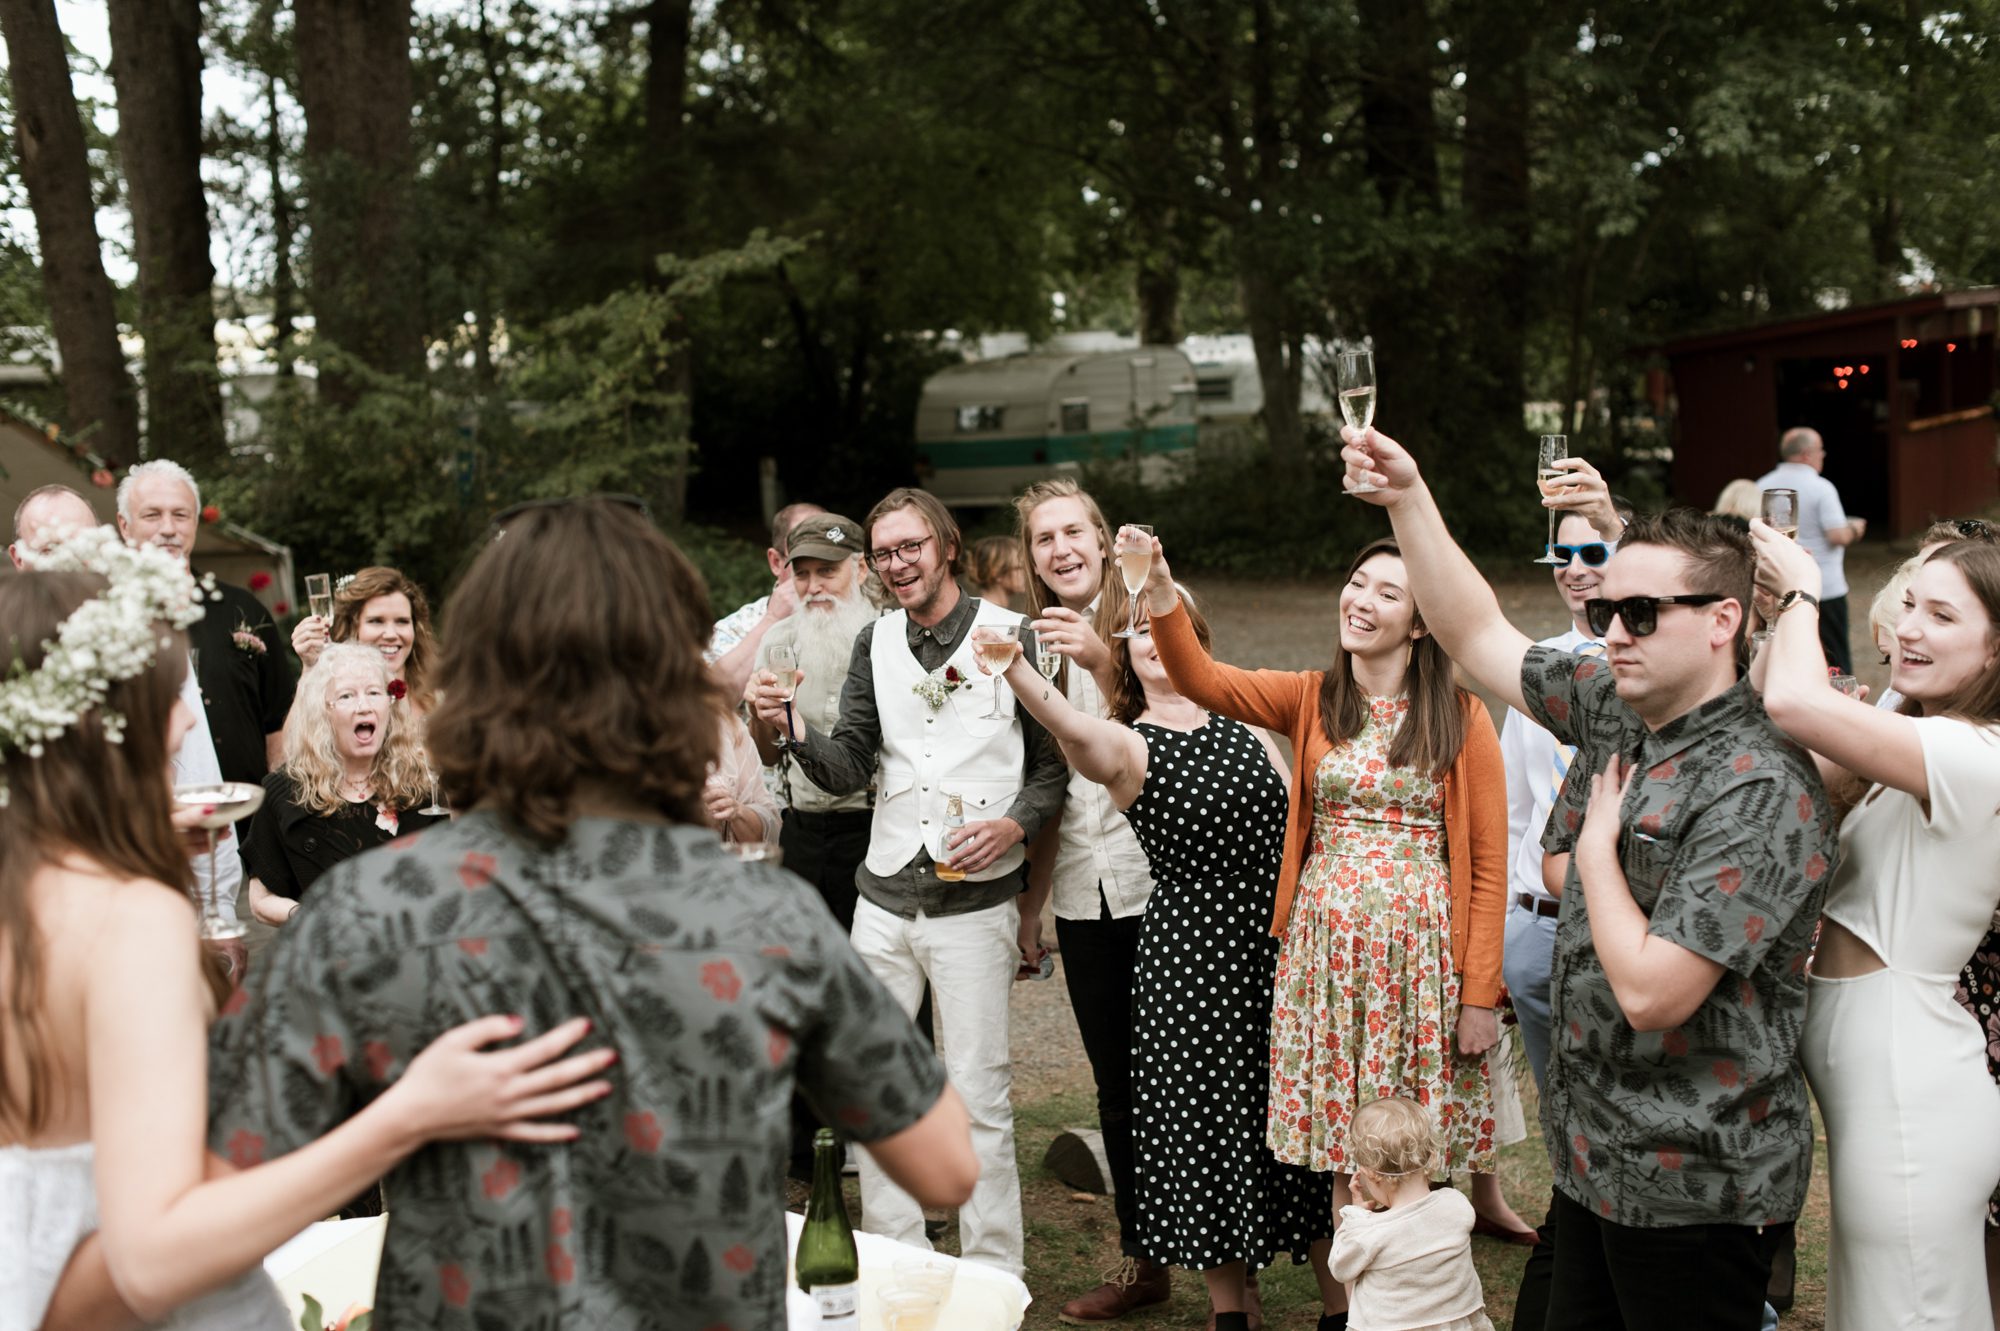 Wedding guests toast the bride and groom. By Sou'Wester wedding photographer Briana Morrison